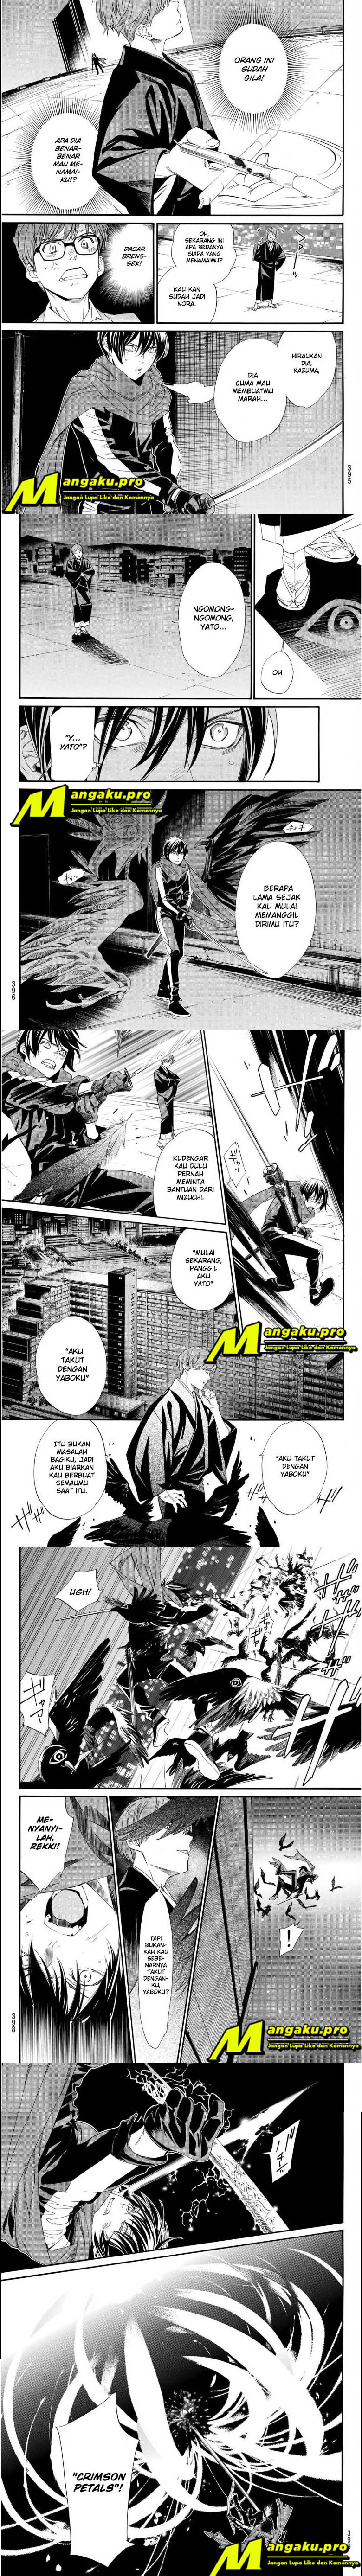 Noragami Chapter 92.2